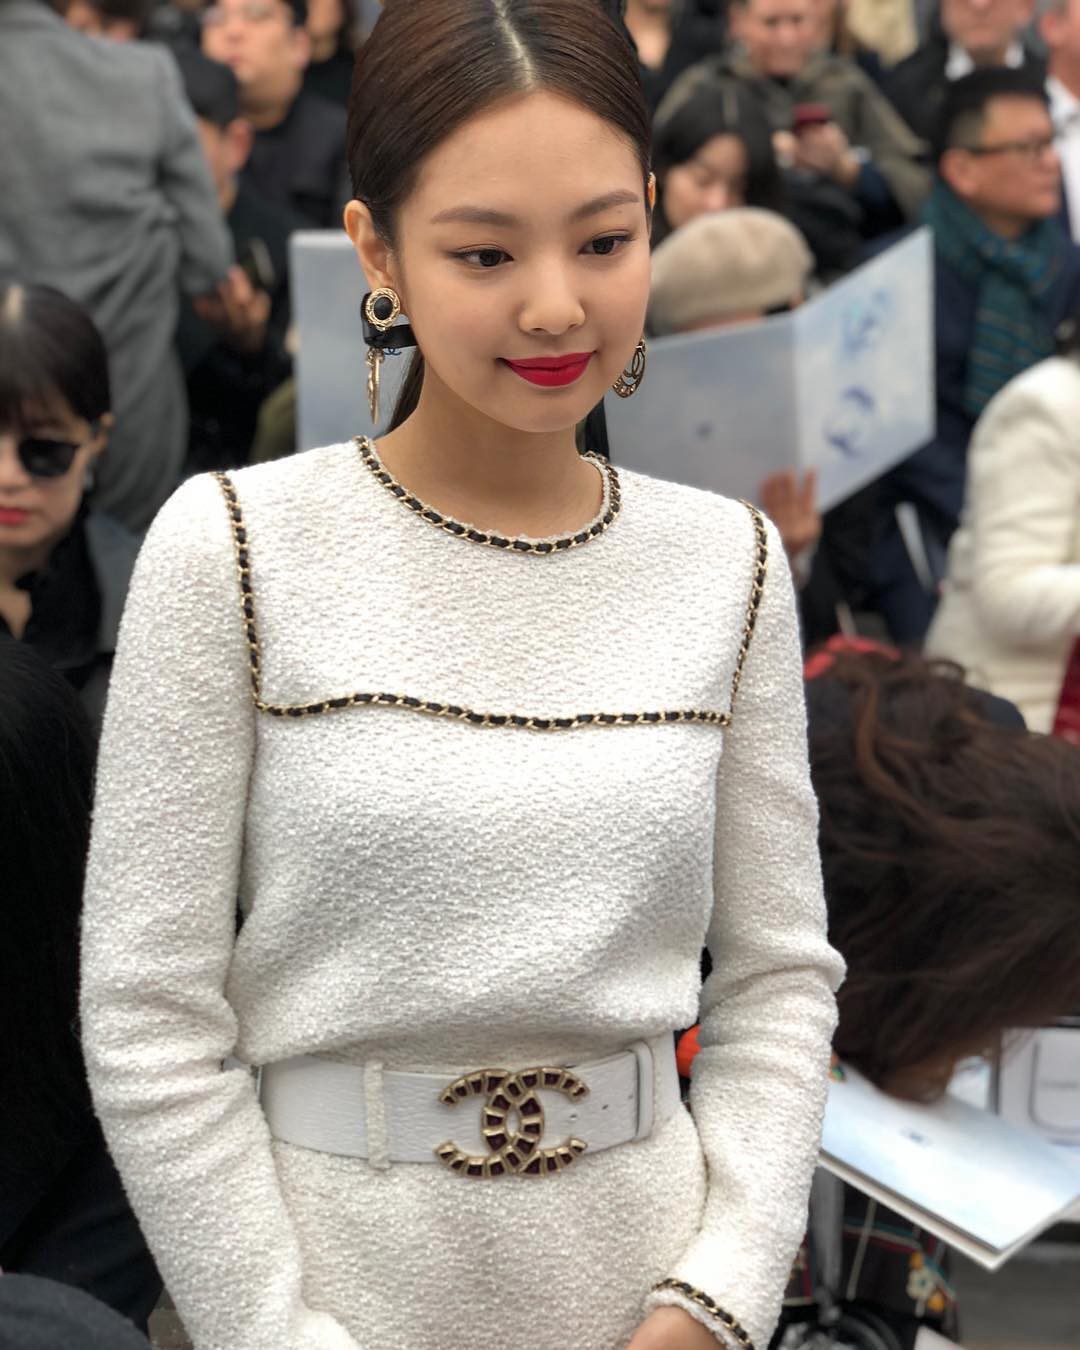 Blackpinks Jennie spotted at Chanel show